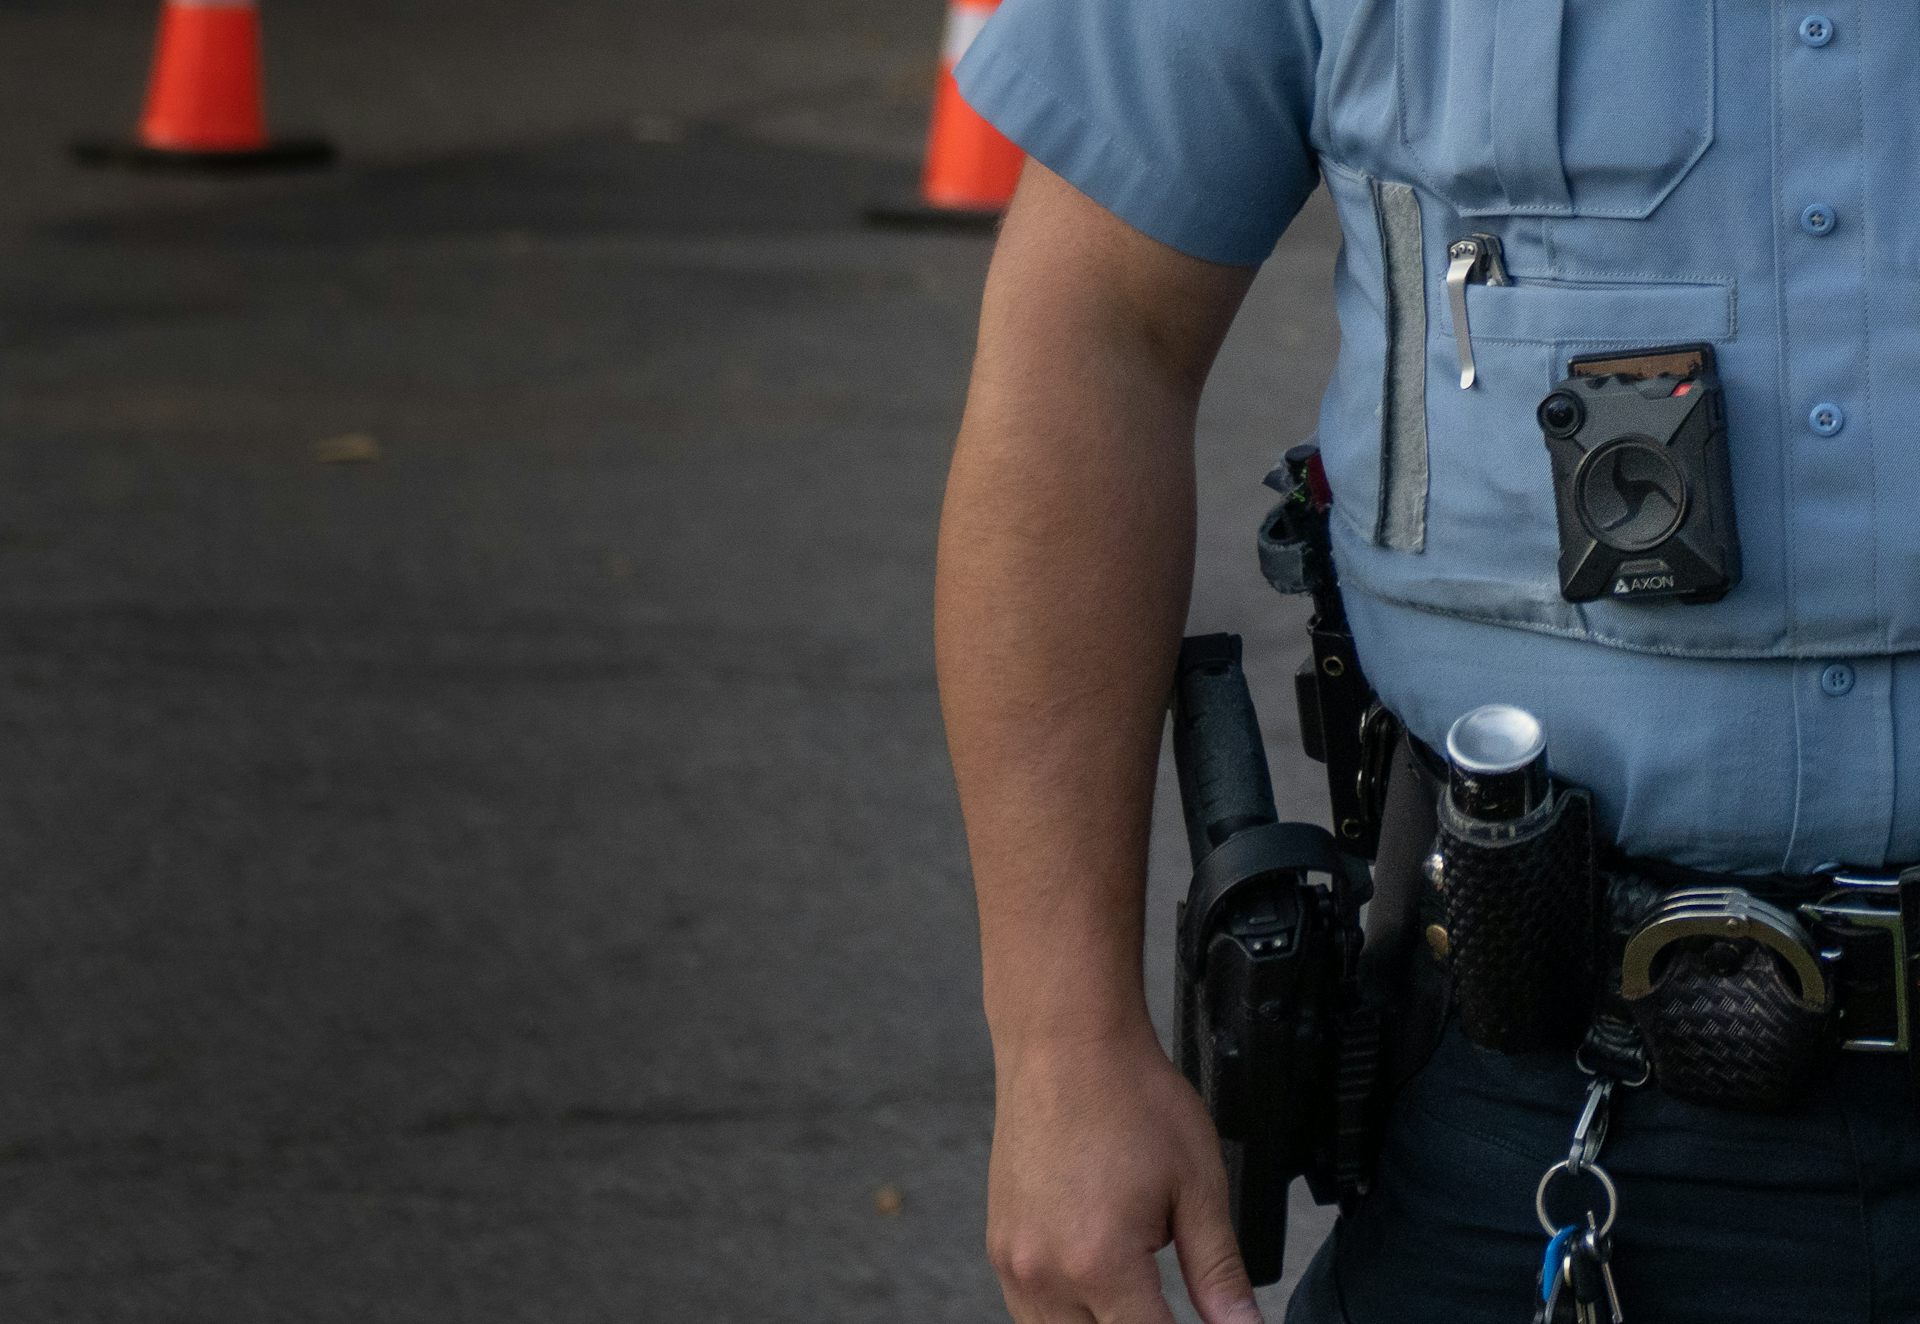 Body Cameras Help Monitor Police but Can Invade People’s Privacy